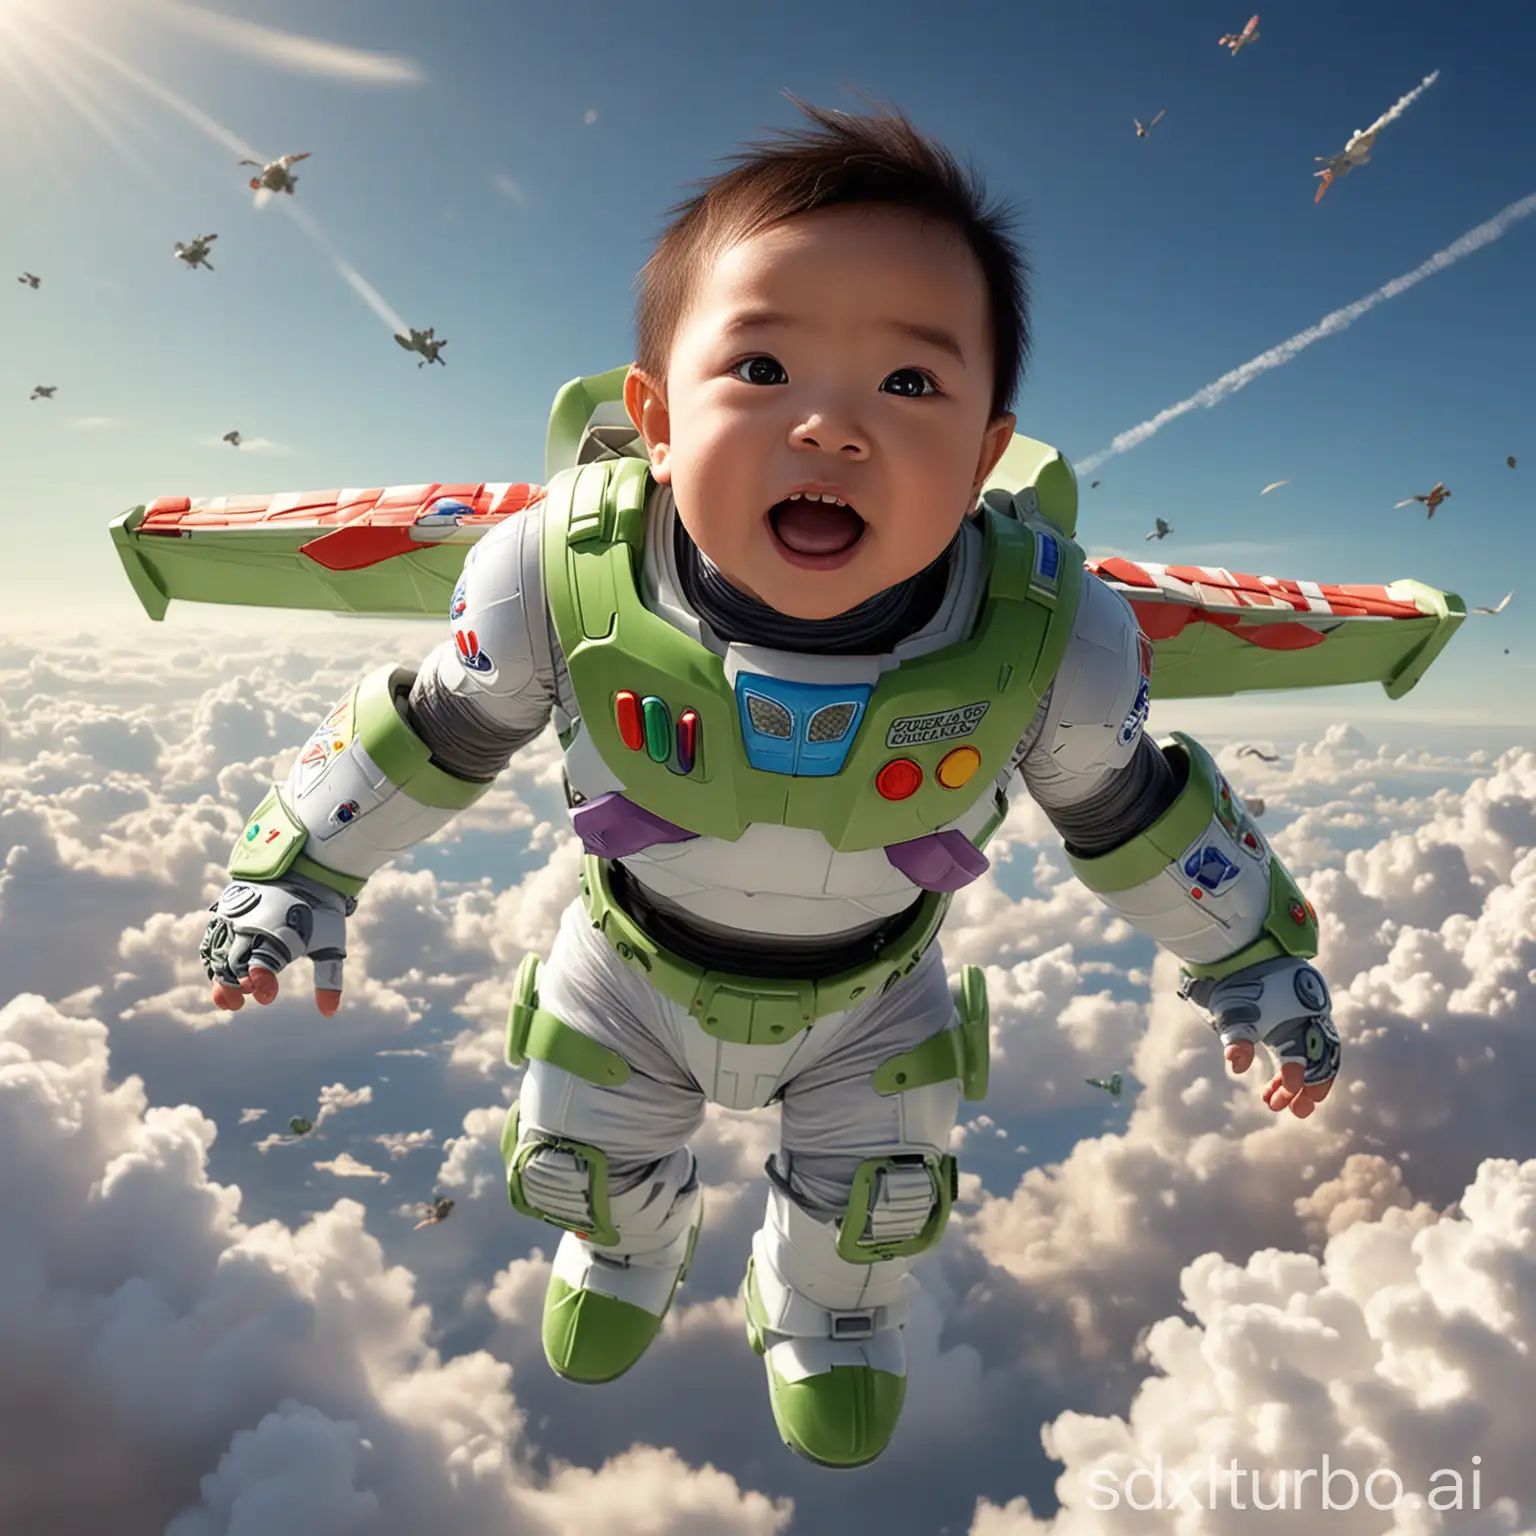 A cute Asian baby dressed as Buzz Lightyear Armour is set up with a background that simulates the sky and clouds, a 1-year-old Chinese baby as the actor of Buzz Lightyear,giving the impression he's flying. The scene captures him from a high angle as if he’s soaring through the clouds, his face filled with excitement and joy. The photorealistic sky adds a dynamic element, creating a sense of motion and flight